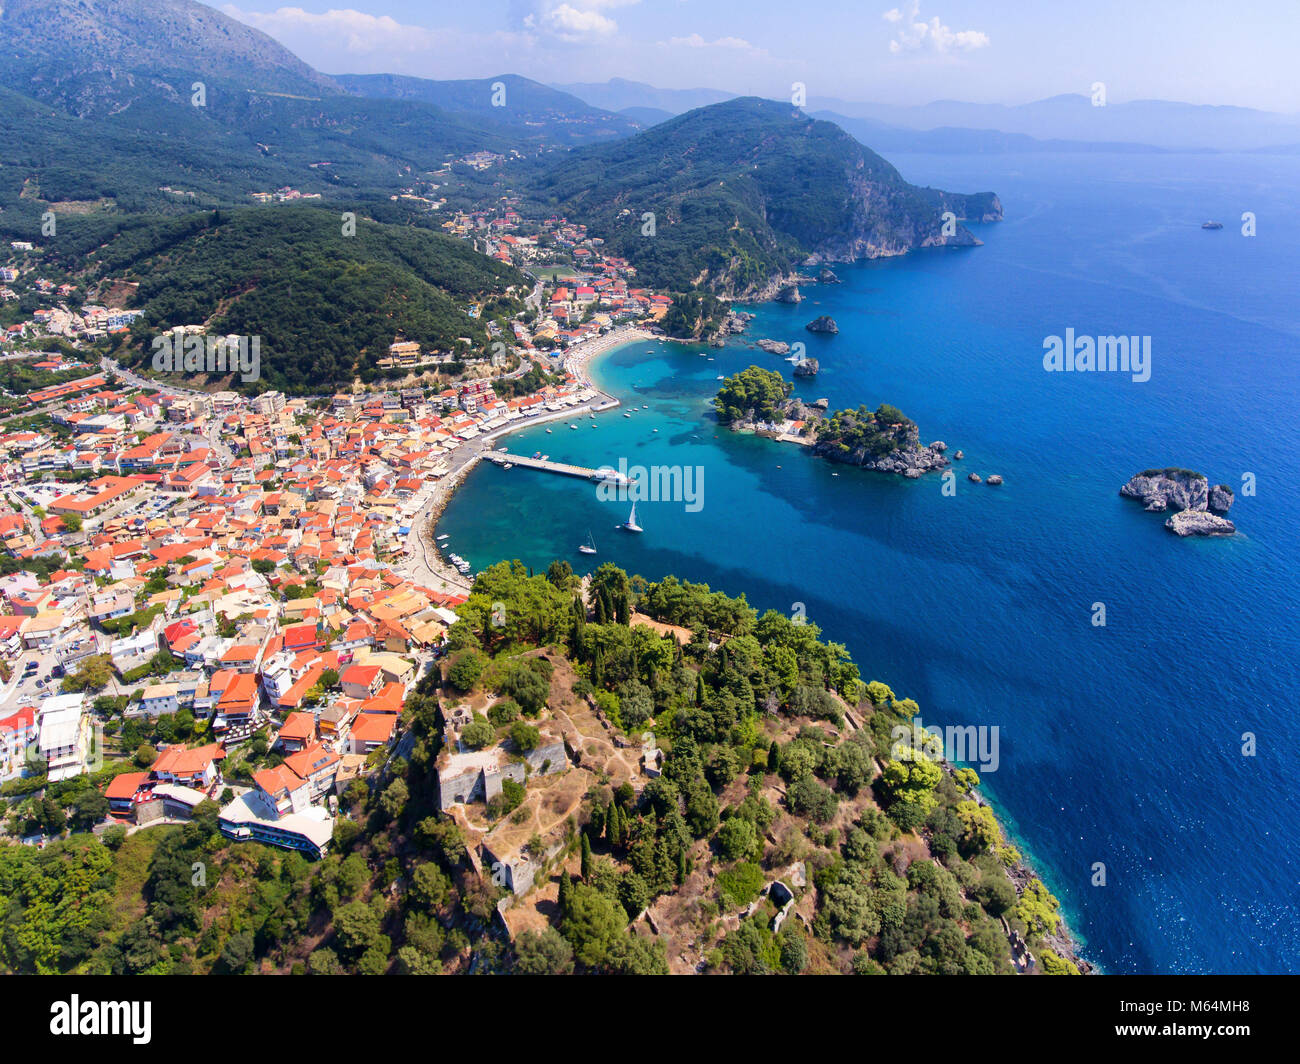 Parga Castle and old village seen from above. Epirus region, Greece. Aerial image. Stock Photo